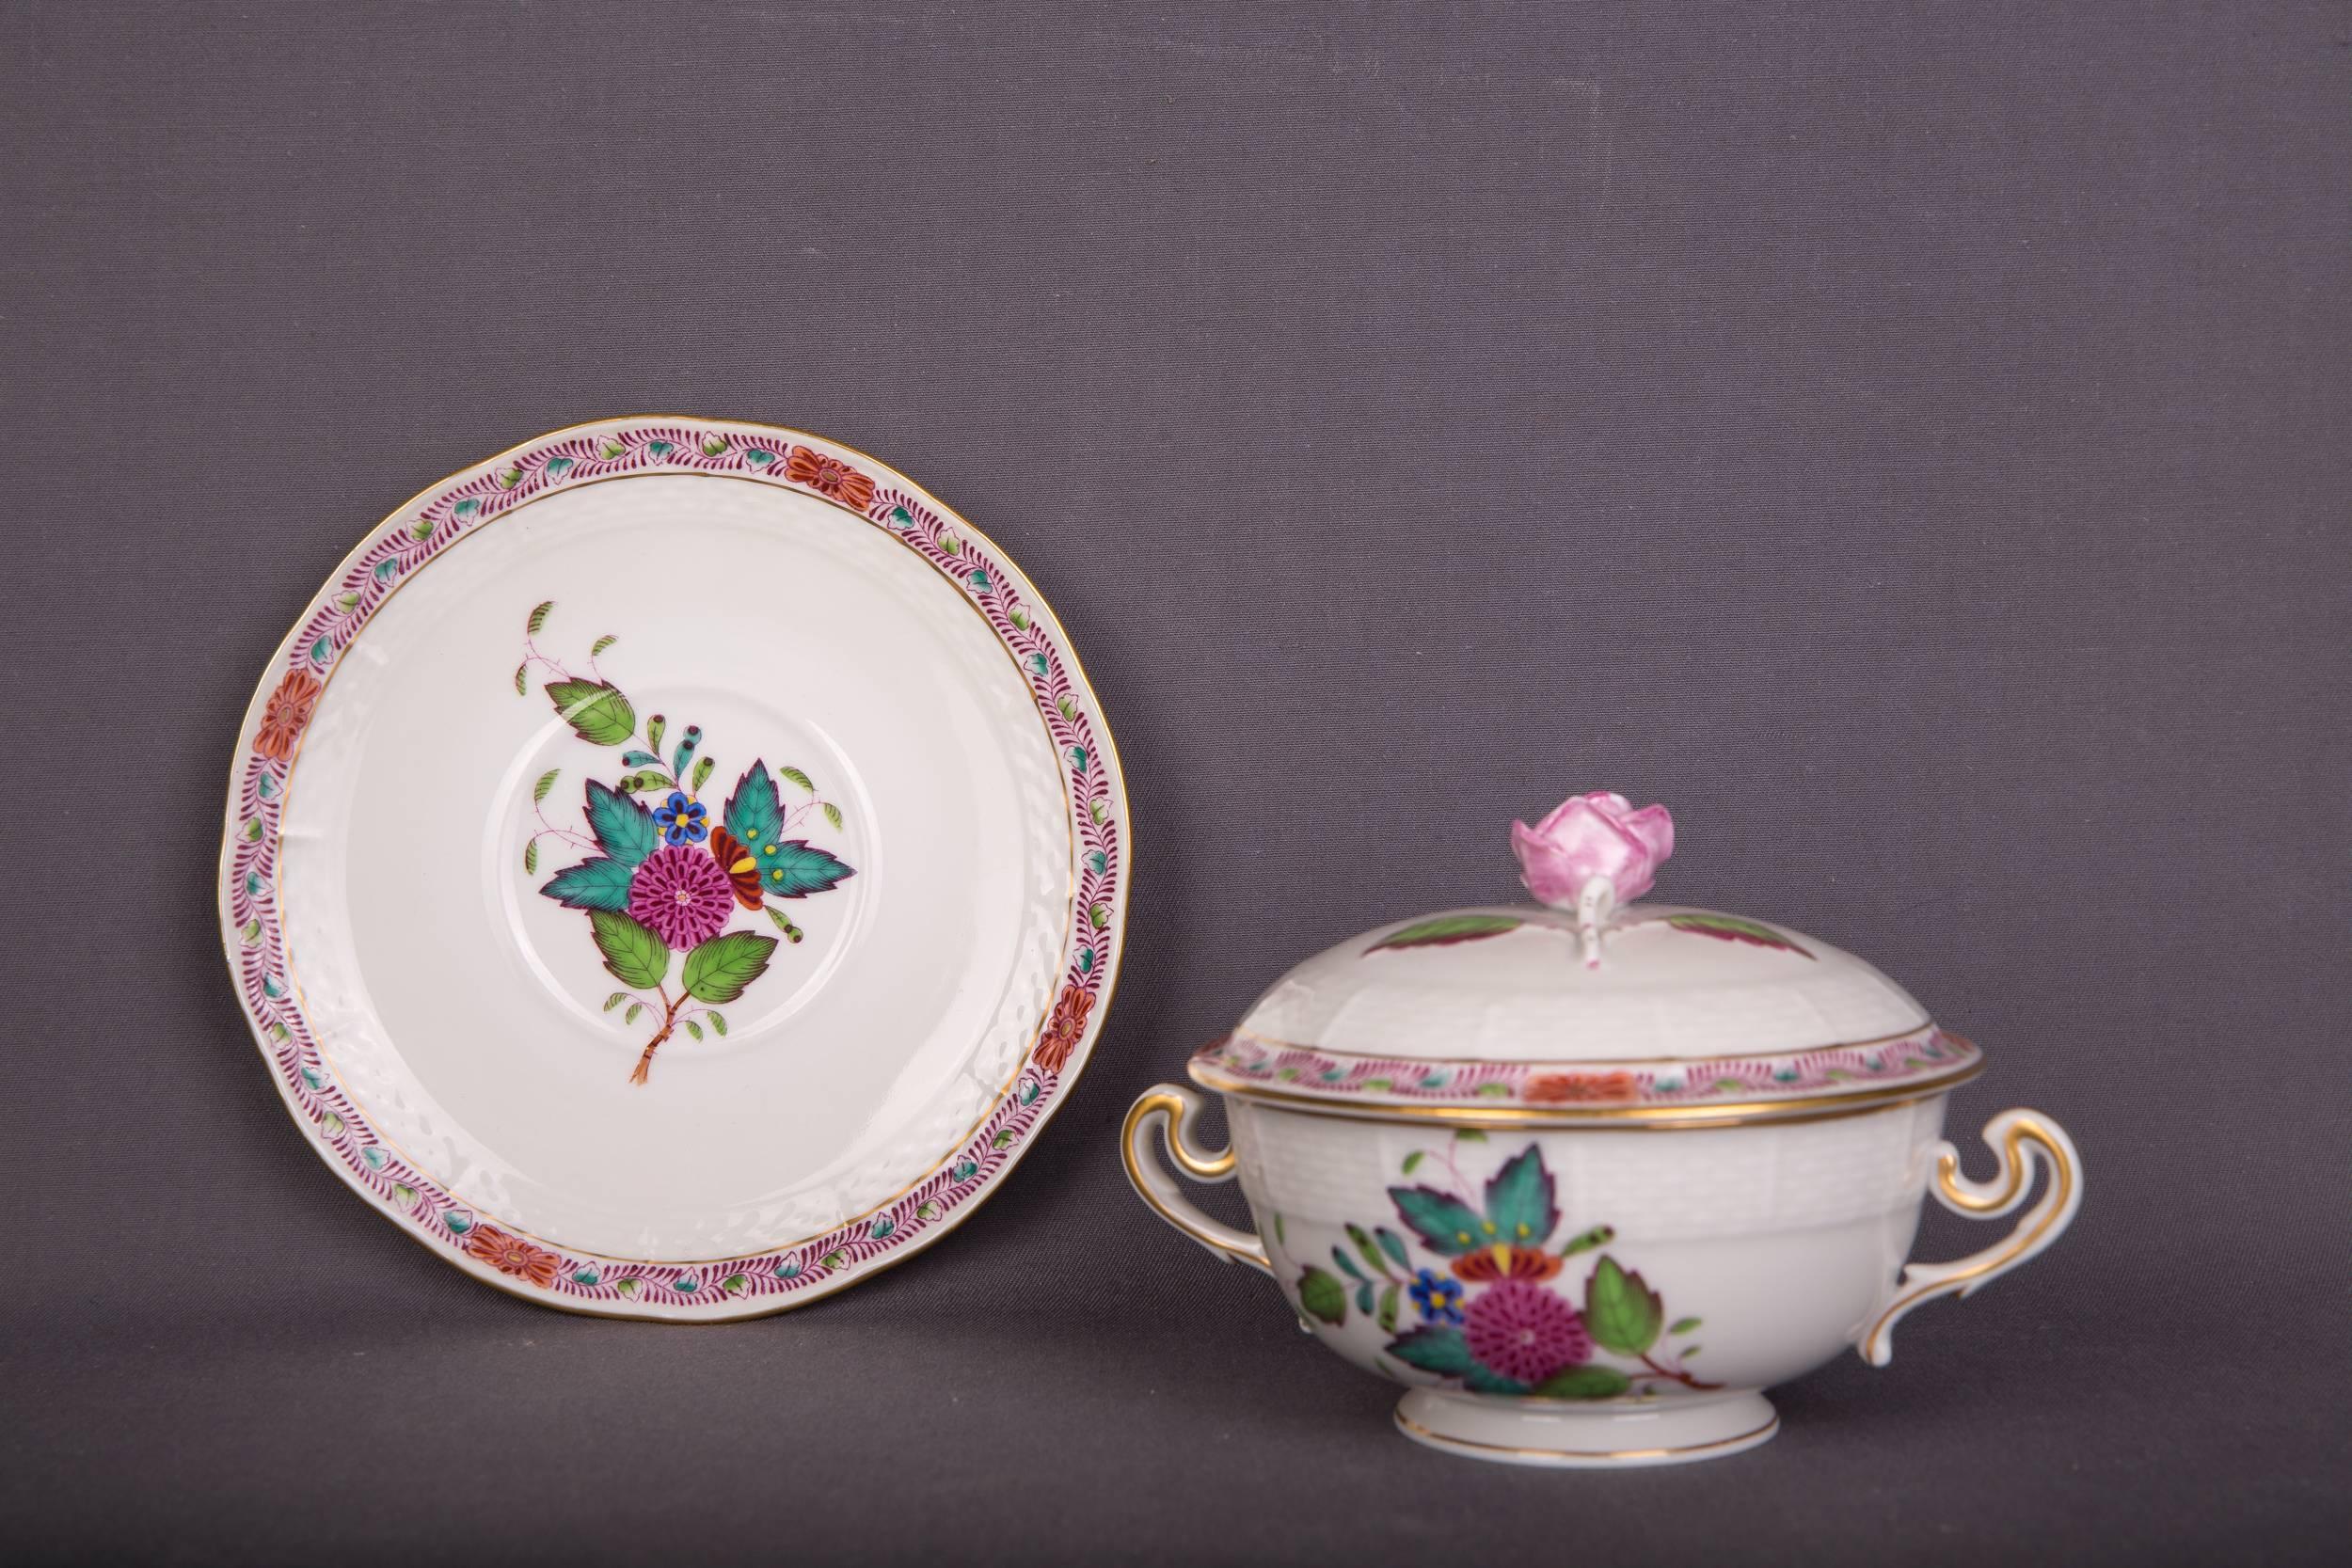 20th Century Extensive Rare Herend Dining Service Porcelain with a Lot of Flowers and Gold